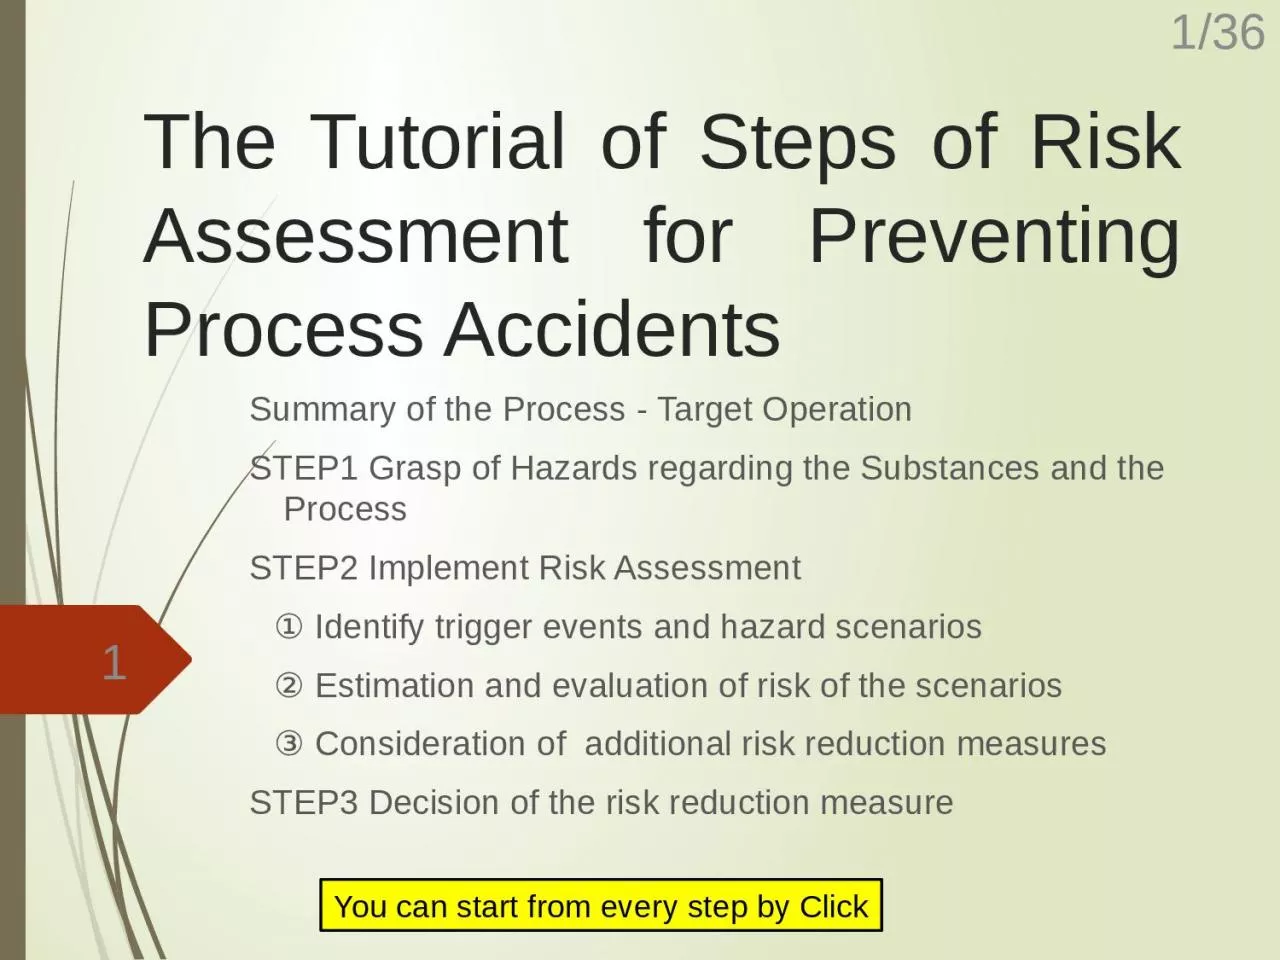 The Tutorial of Steps of Risk Assessment for Preventing Process Accidents